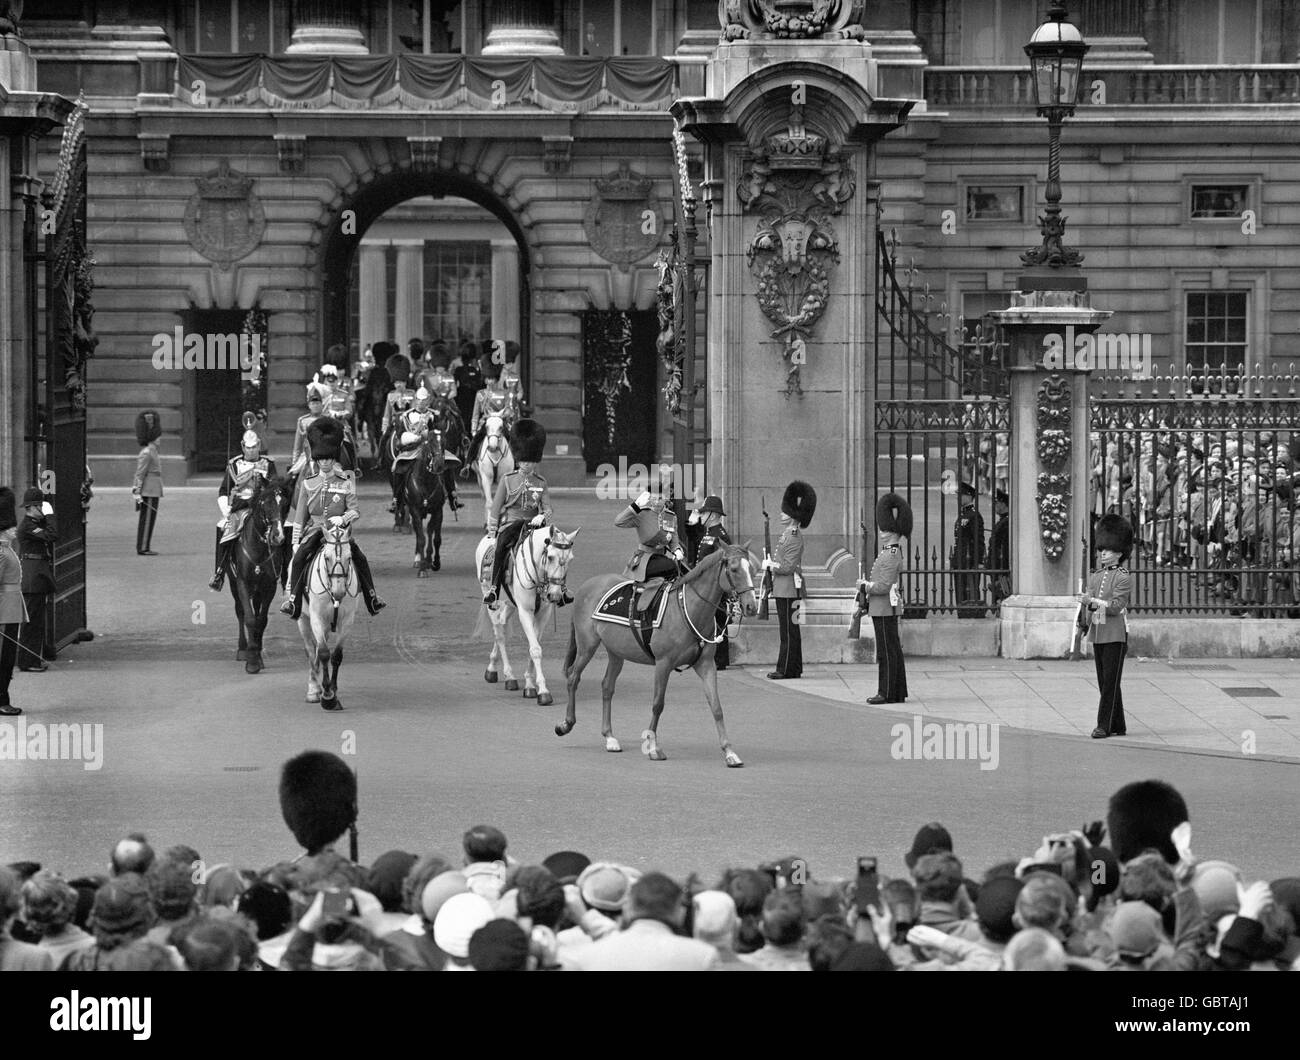 The Queen's official birthday was celebrated today (Thursday) with the traditional ceremony of 'Trooping the Colour' , this year that of the Coldstream Guards, on Horse Guards Parade. The Queen saluting as, watched by a crowd, she rides out of the gateway of Buckingham Palace on her way to the Trooping. Stock Photo